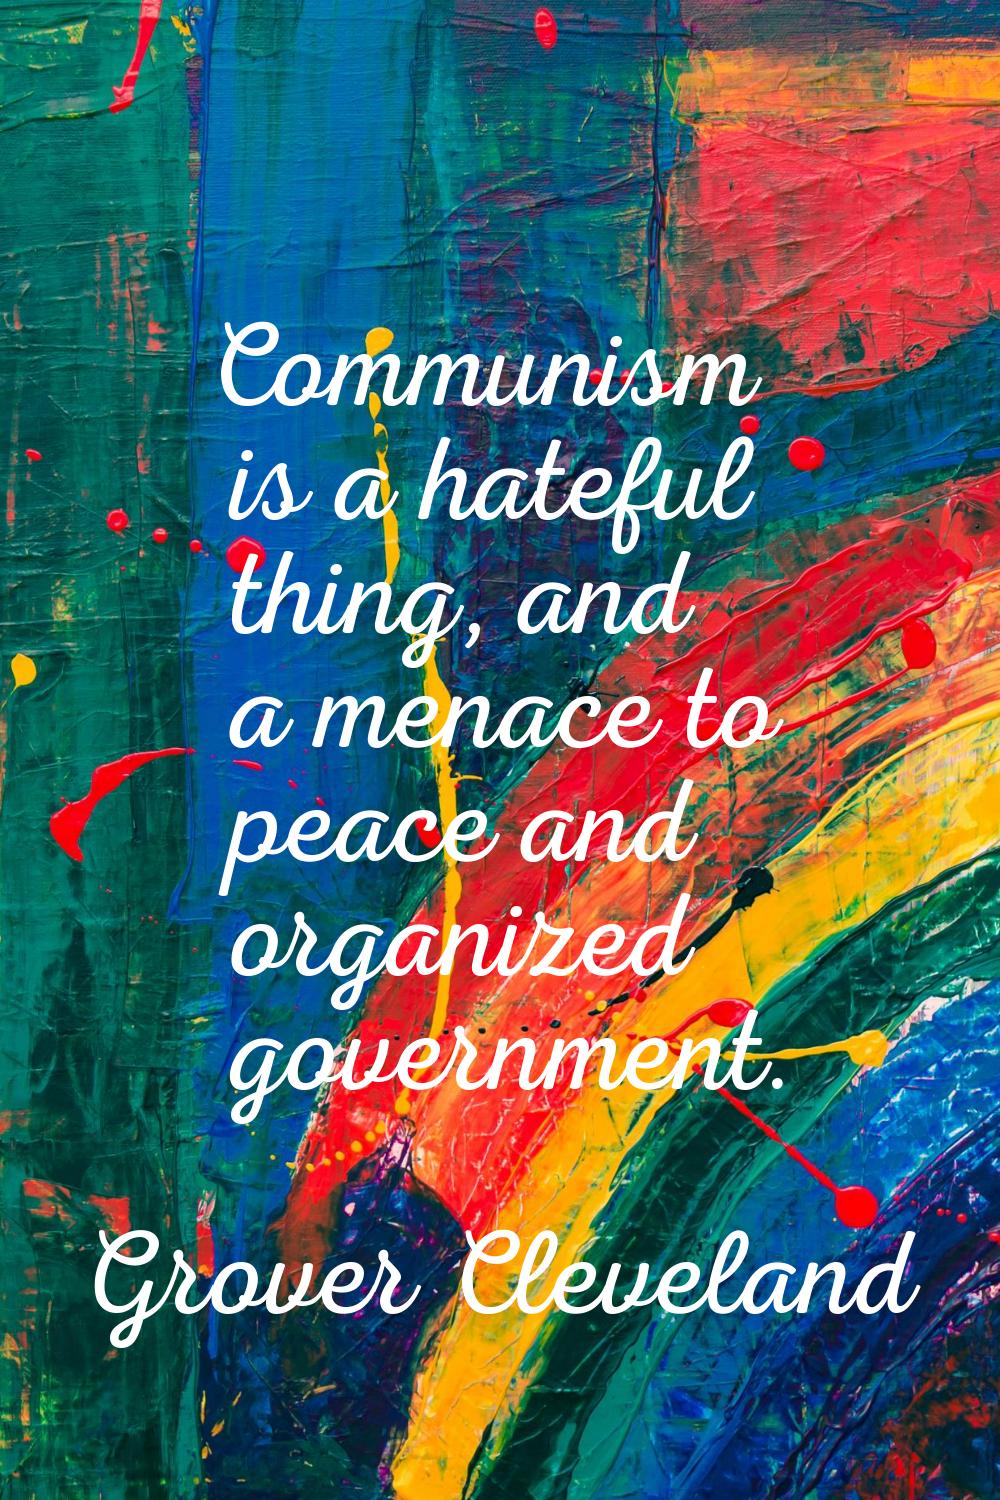 Communism is a hateful thing, and a menace to peace and organized government.